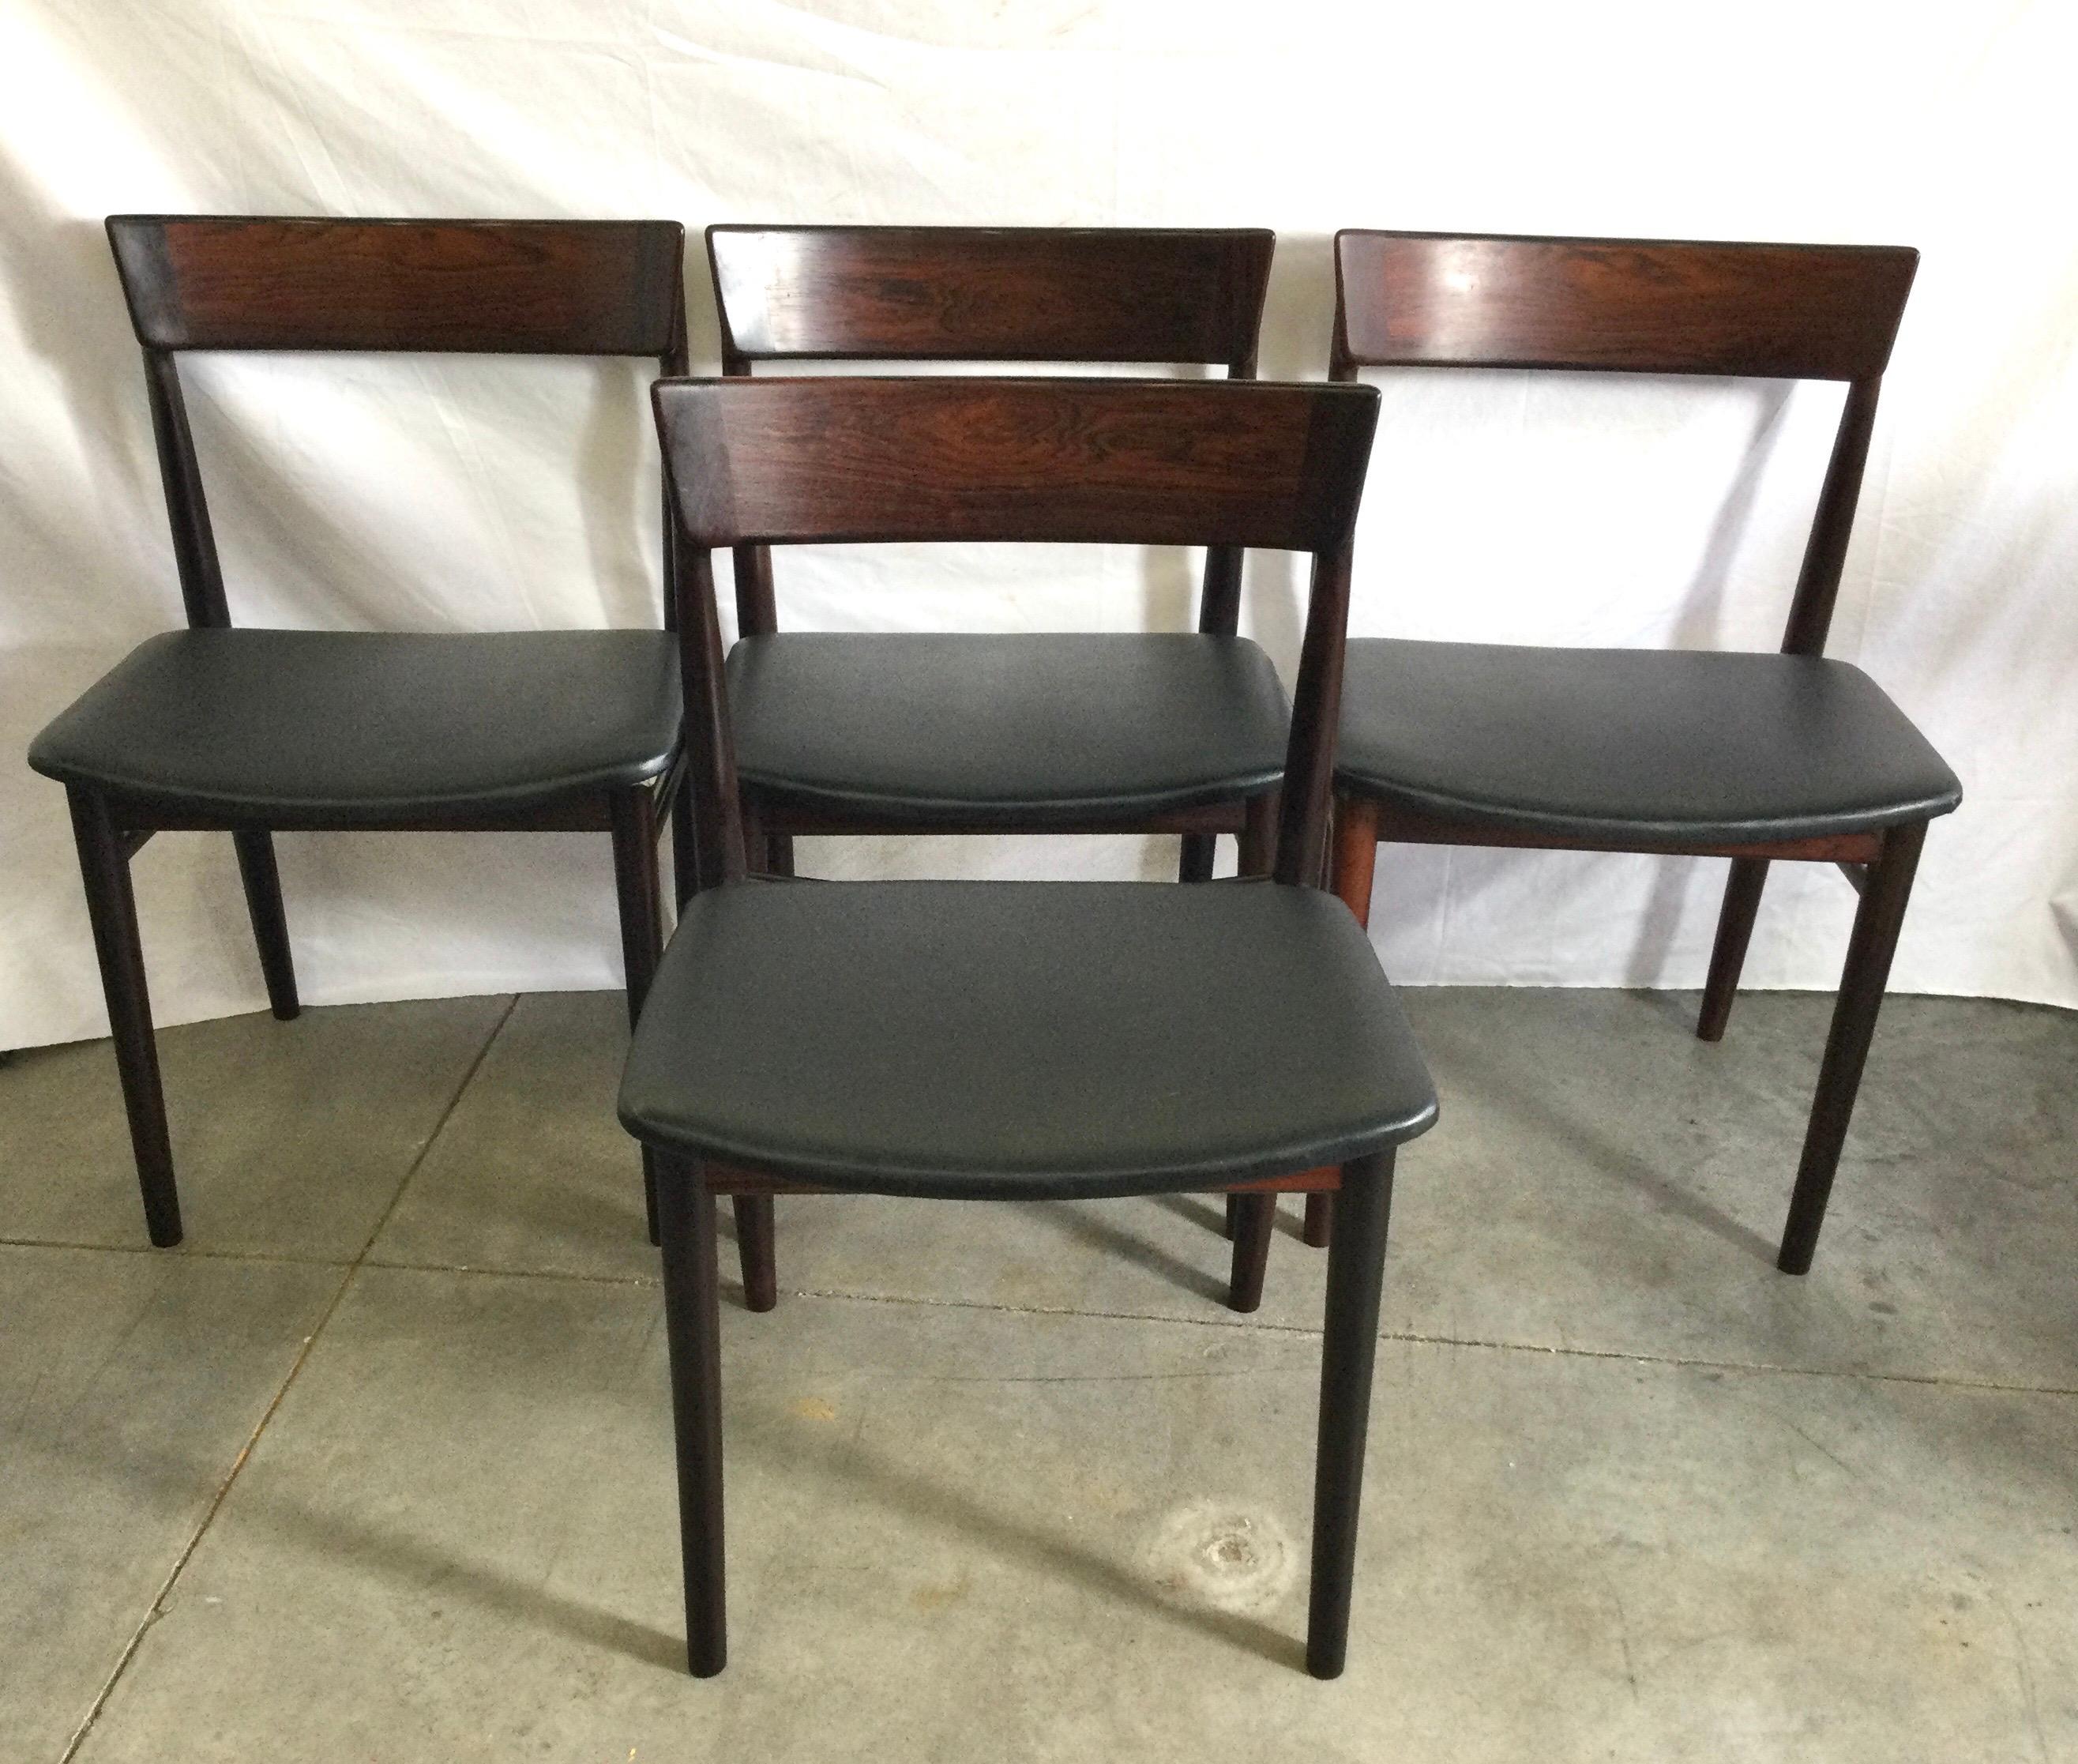 Mid-Century Modern St of Six Rosewood Dining Chairs by Henry Rosengren Hansen, 1960's